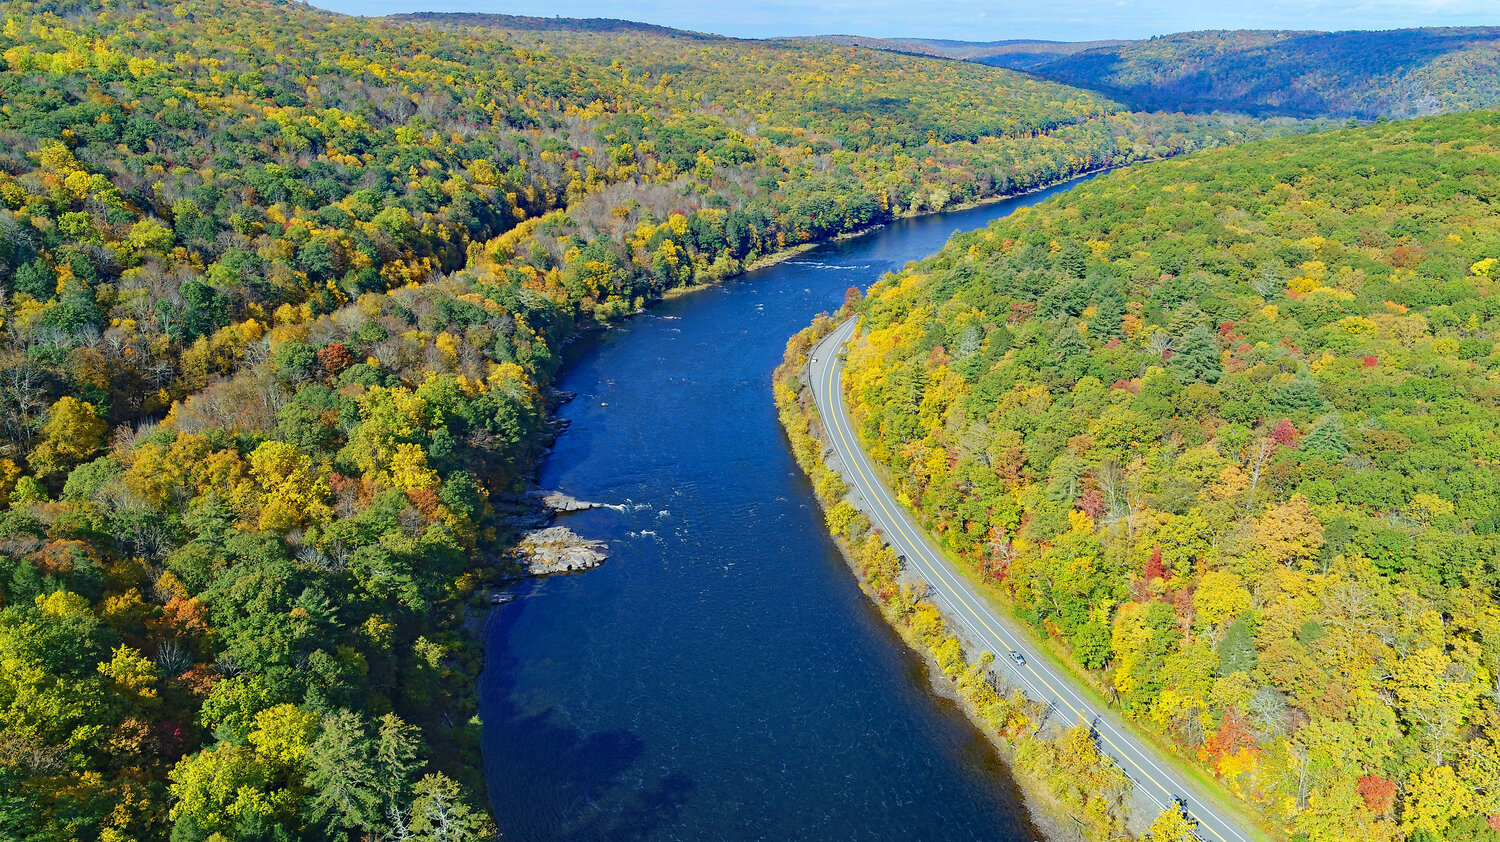 Here is an aerial view looking upstream towards Staircase Rapids on the Delaware River. The Delaware River valley is one of the lowest-lying areas in the region; the fall foliage can be a few days behind the mountain tops due to the lower elevation. ..Paddling the river is a great way to see the fall foliage. Be prepared for cooler weather and cooler water temperatures, and please wear your lifejacket. ....